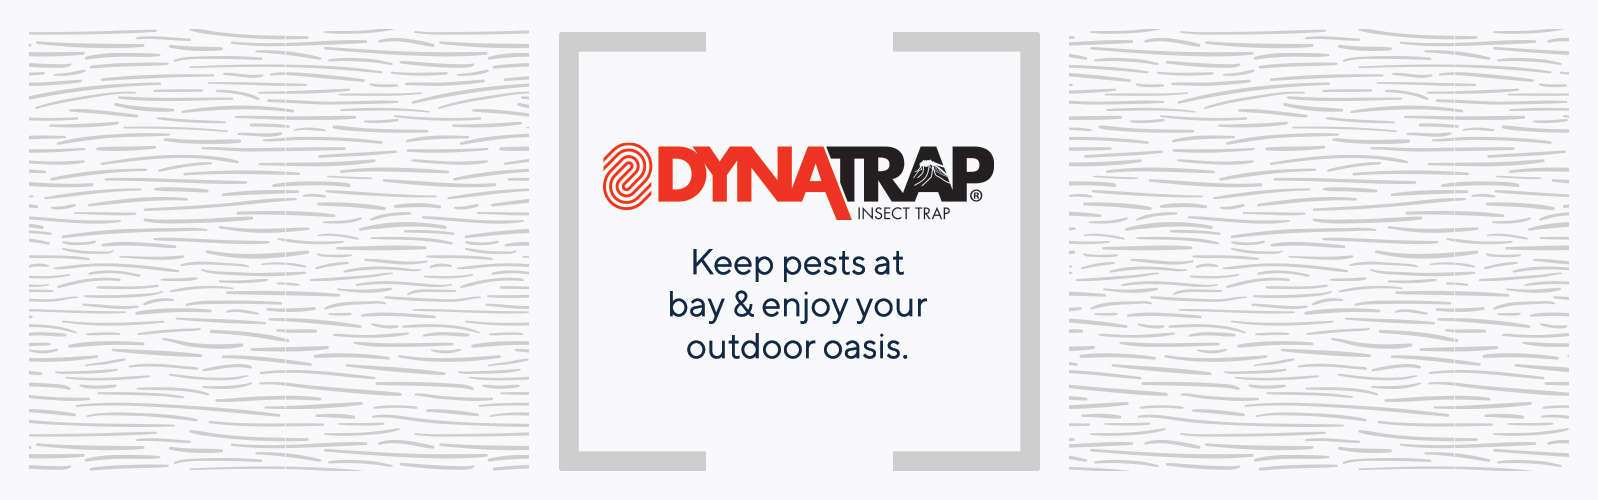 DynaTrap — Insect Traps 